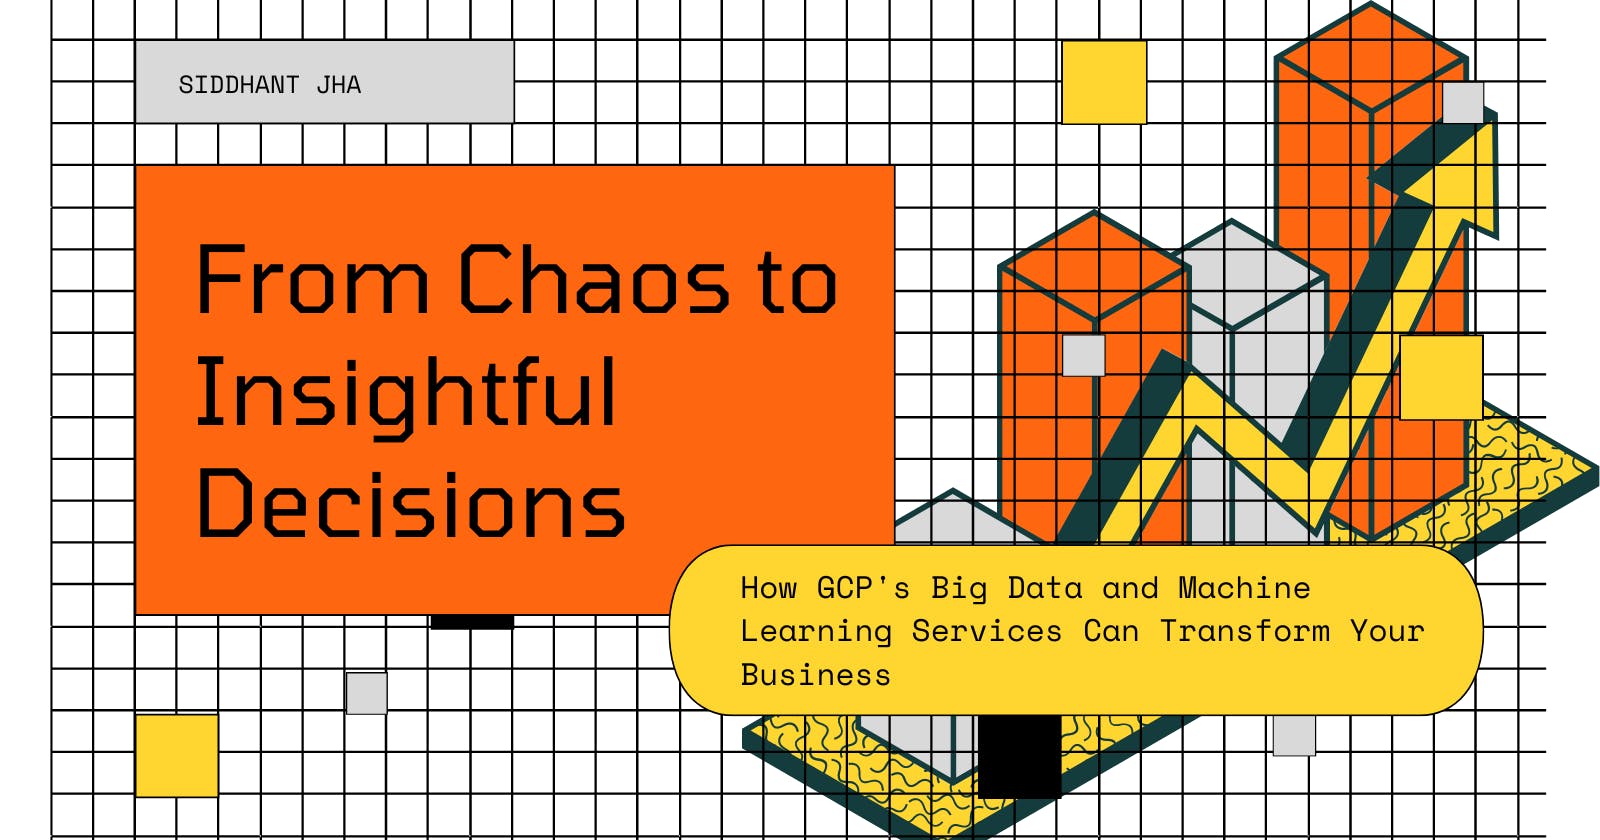 From Chaos to Insightful Decisions